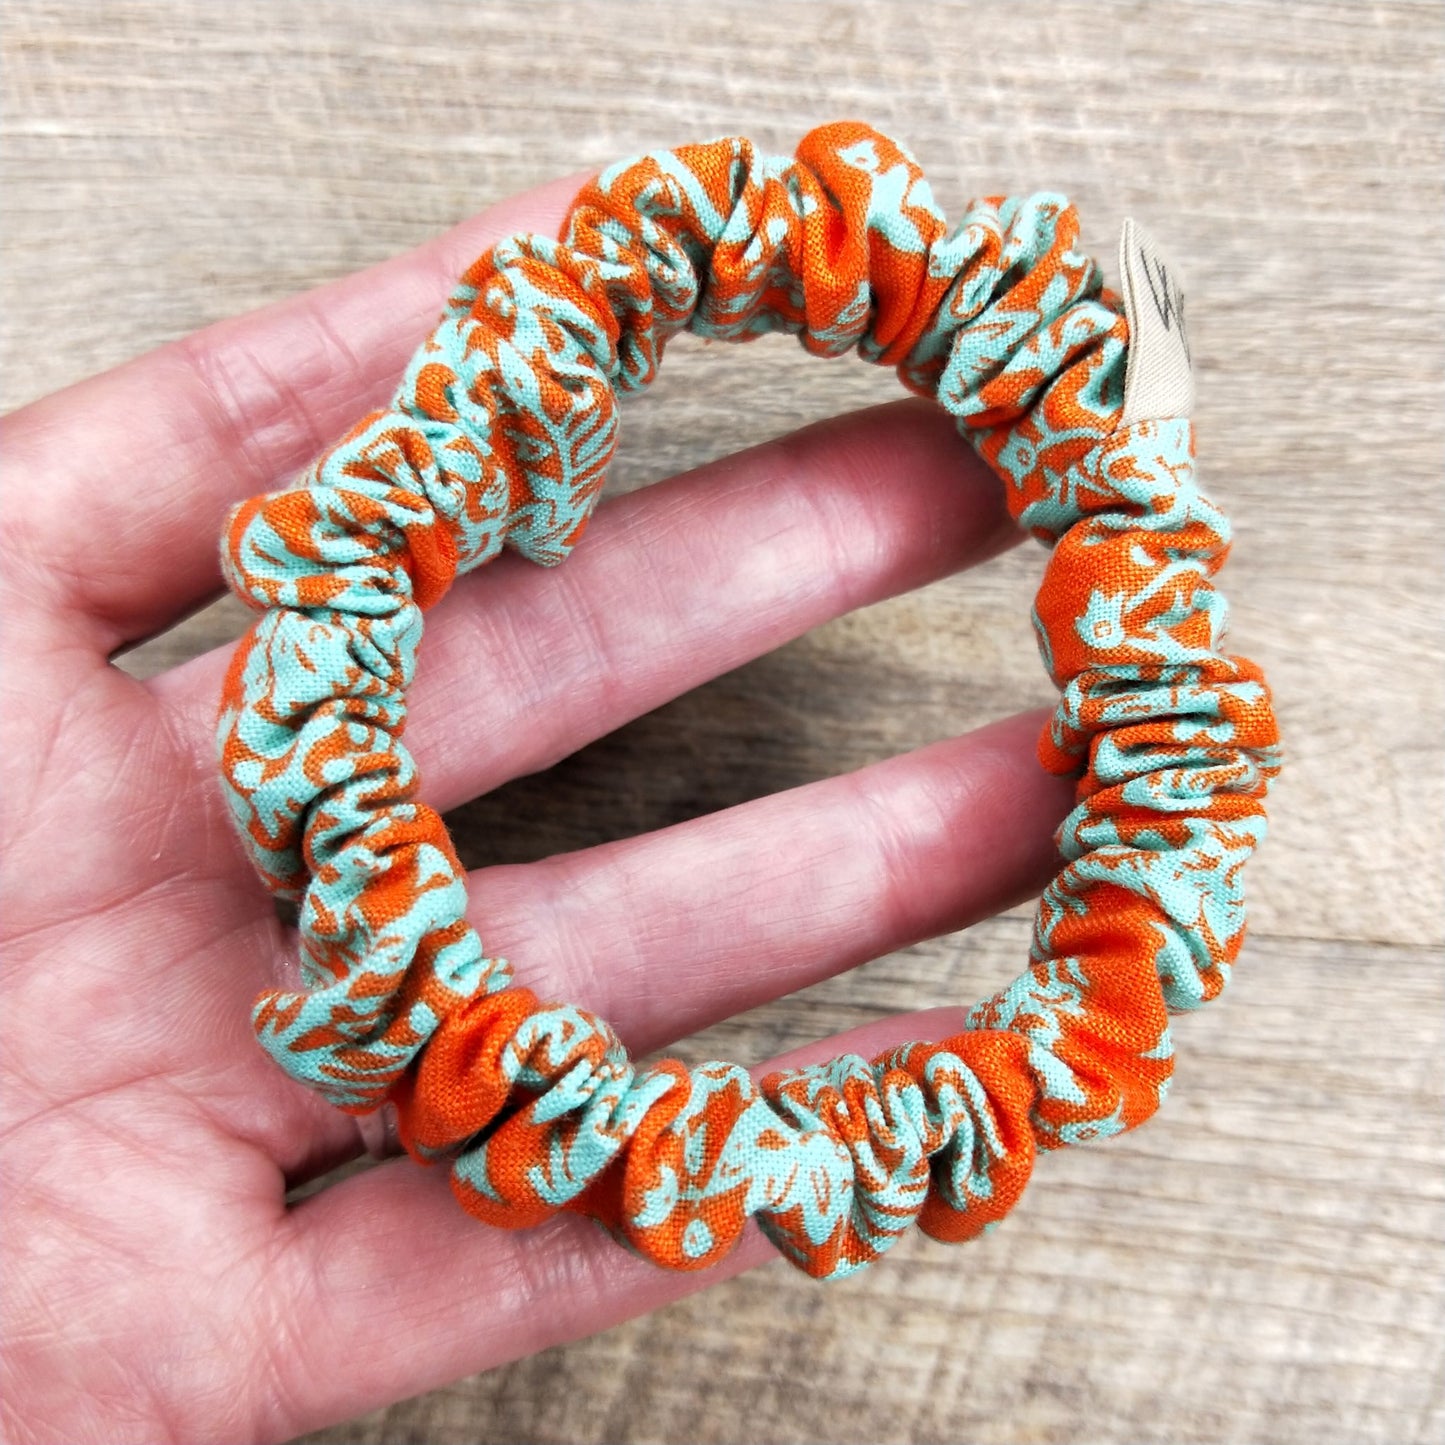 Scrunchies - Orange and Teal Floral